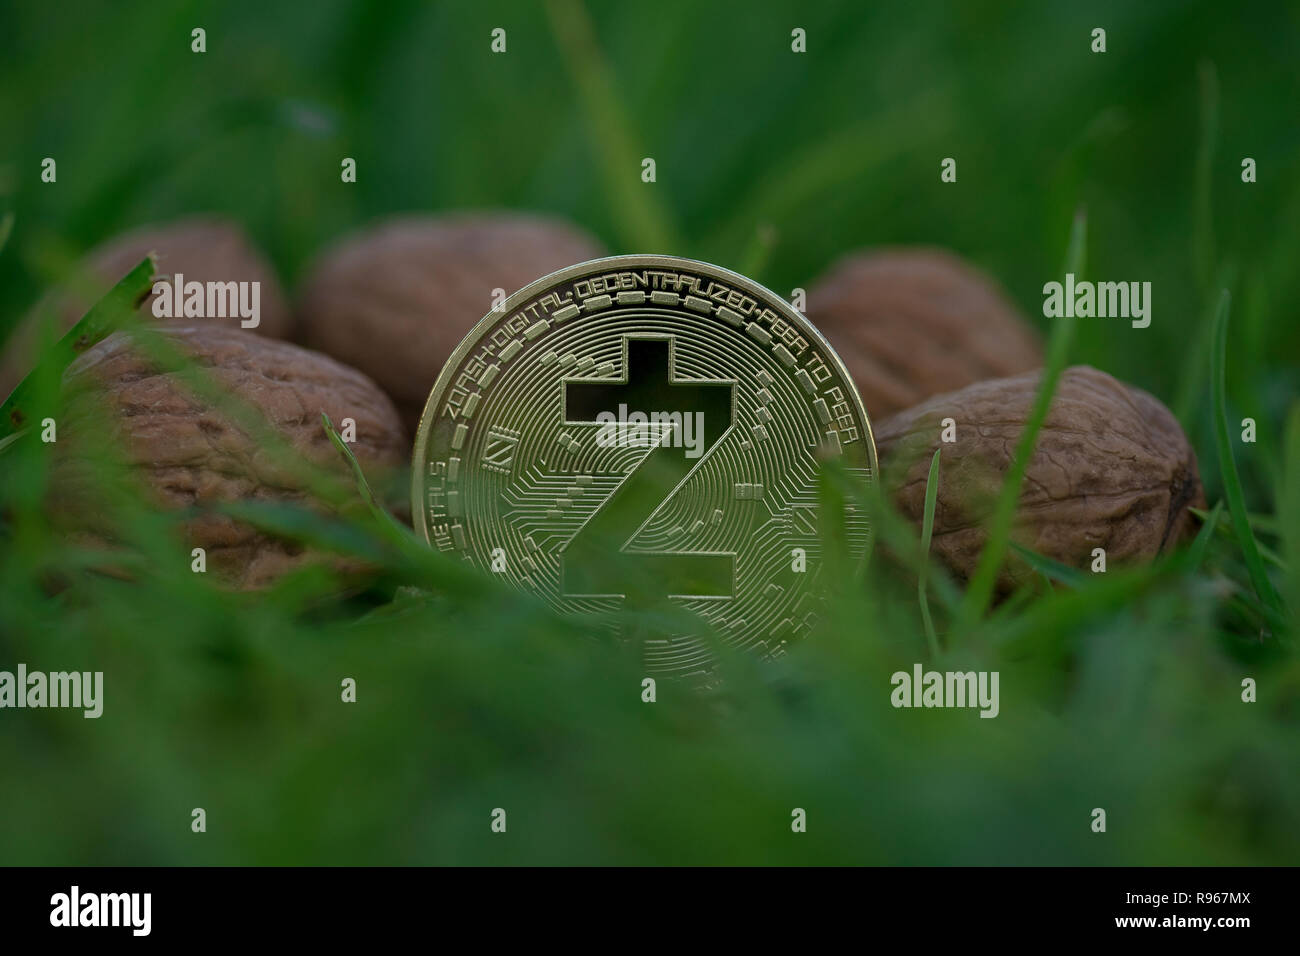 Z-Cash cryptocurrency physical coin placed on grass with walnuts Stock Photo